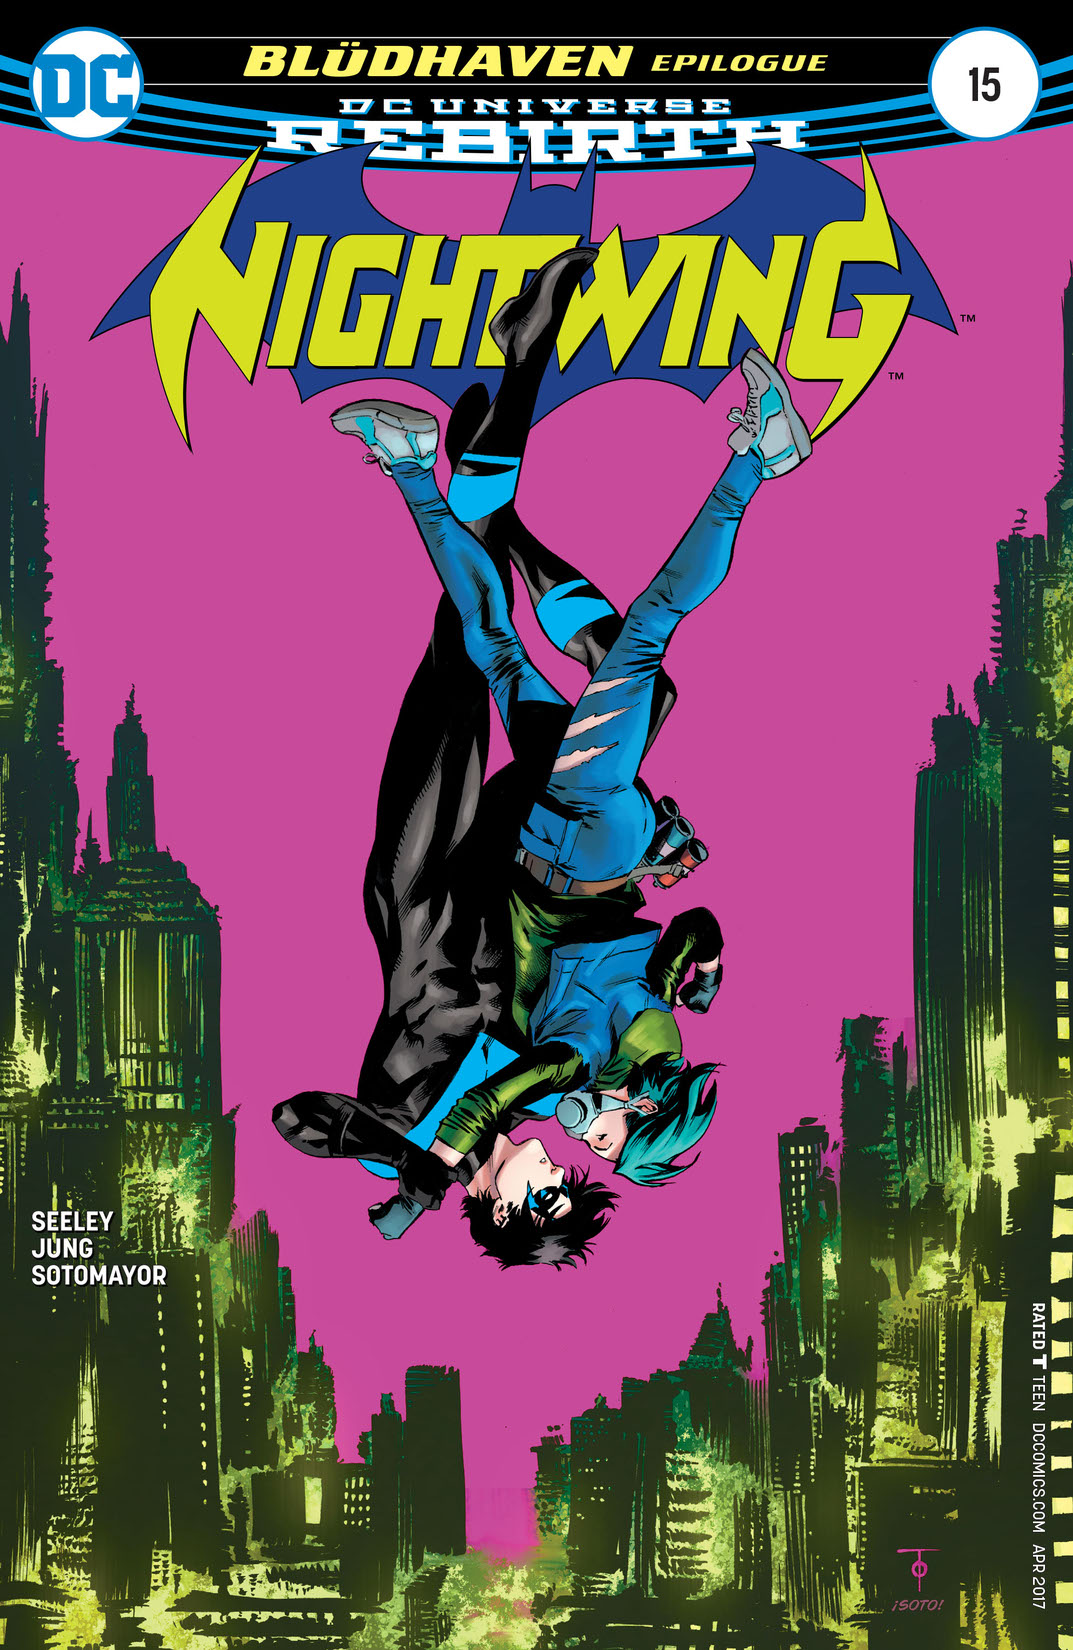 Nightwing (2016-) #15 preview images